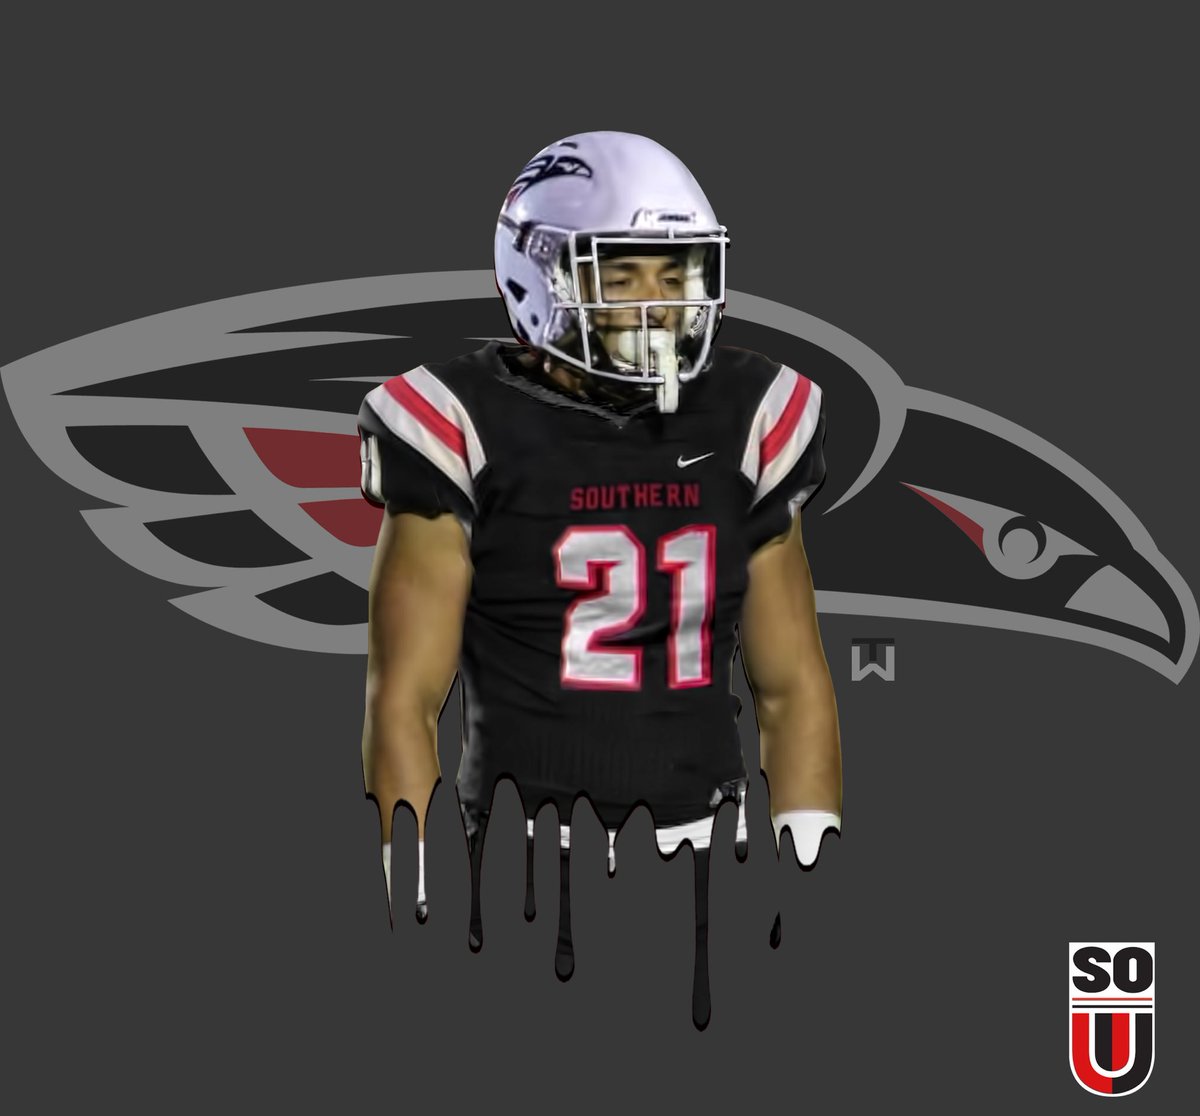 Committed. #209Made @SOU_Football